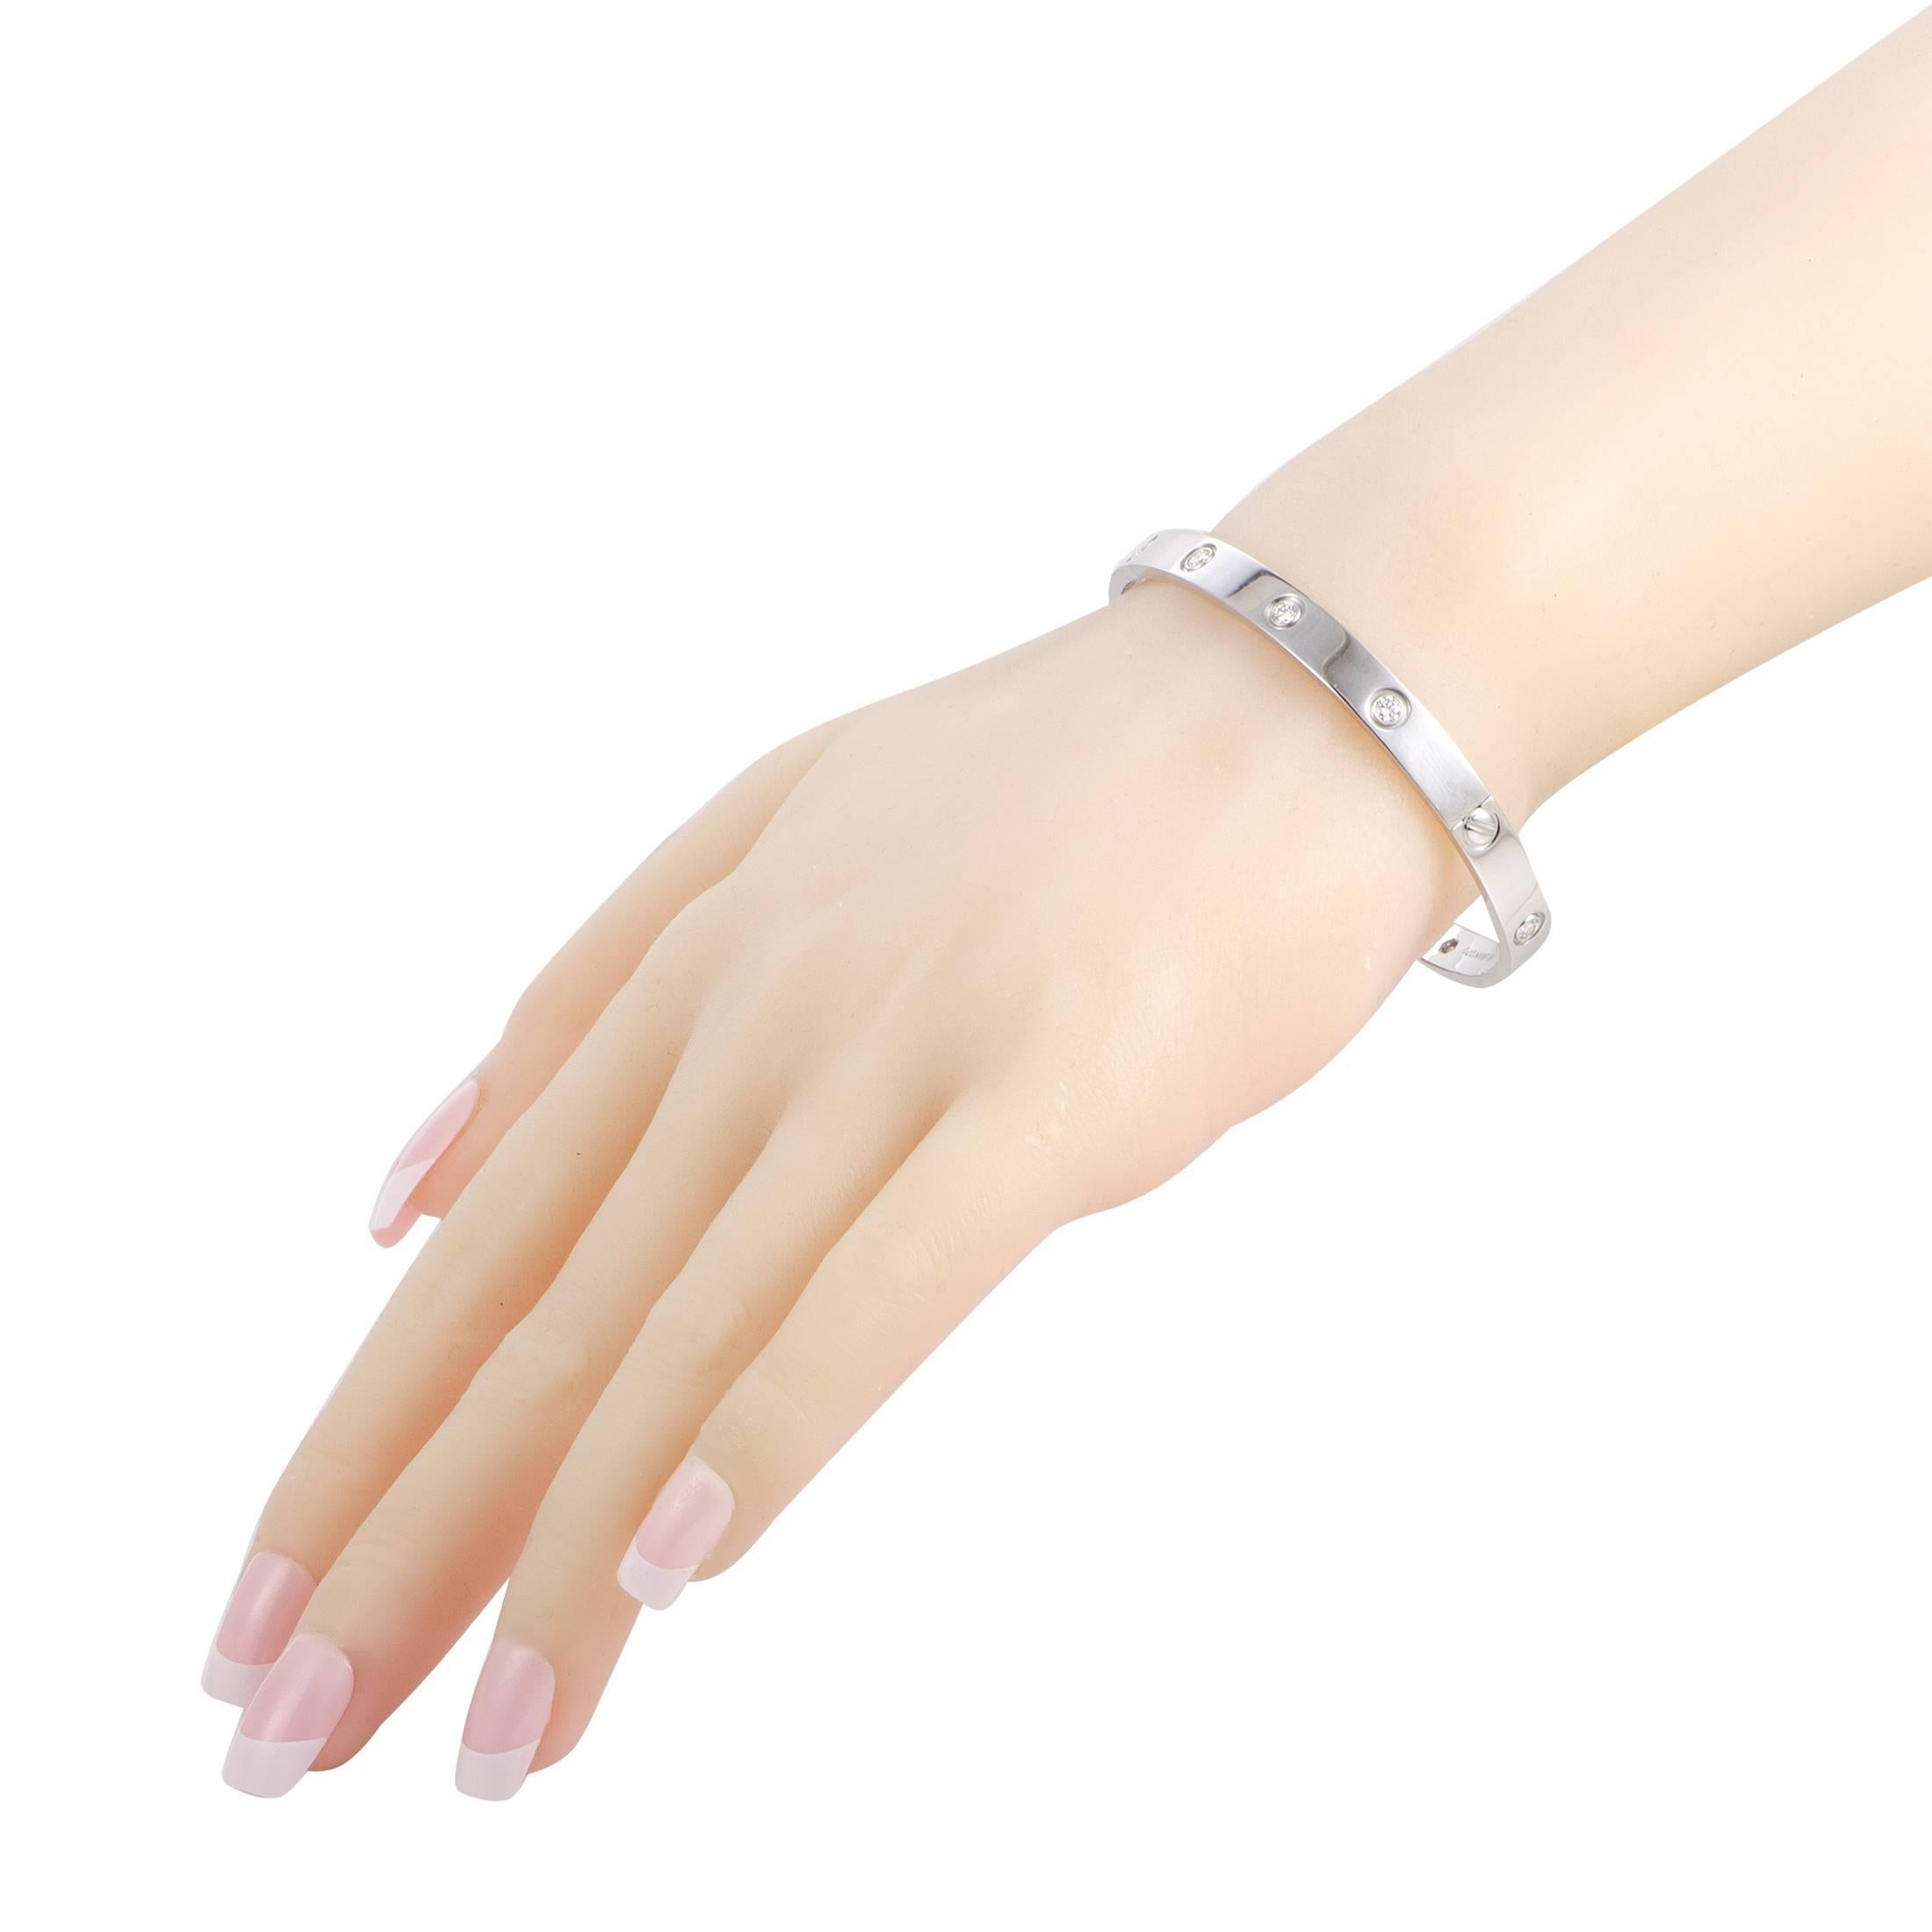 A piece from the acclaimed “LOVE” collection by Cartier, this sublime bracelet offers a splendidly elegant look. The bracelet is made of 18K white gold and it is set with 10 diamonds that amount to 0.96 carats. This bracelet comes with a matching